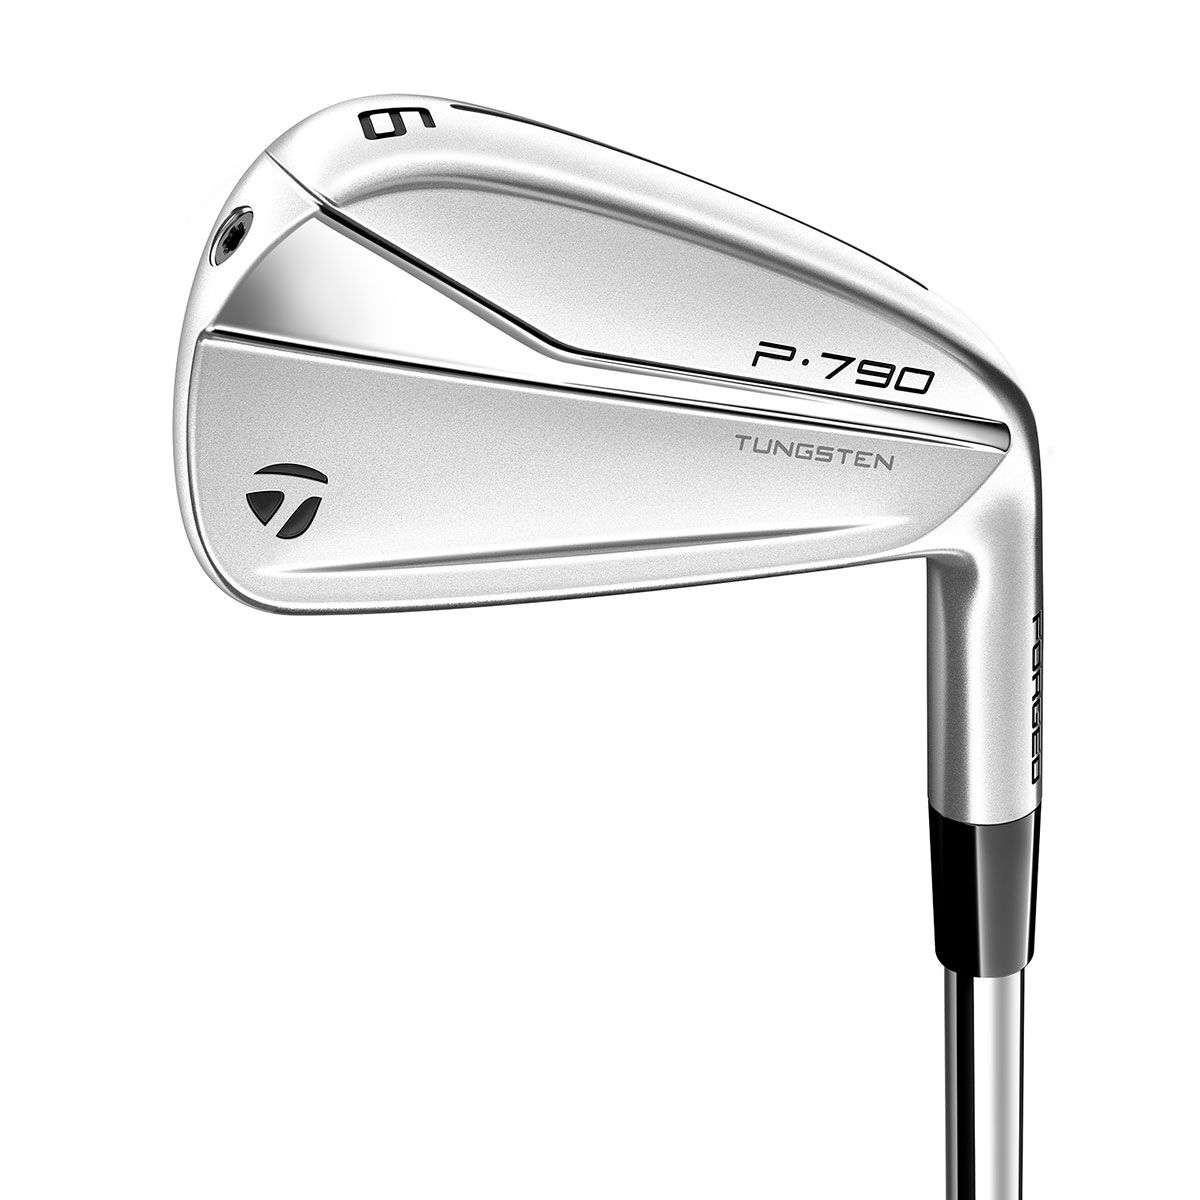 TaylorMade Silver and Black Printed P790 Graphite Golf Irons 2021, Mens, 5-Pw (6 Irons), Right Hand, Graphite, Regular | American Golf, Size: 1.5mm